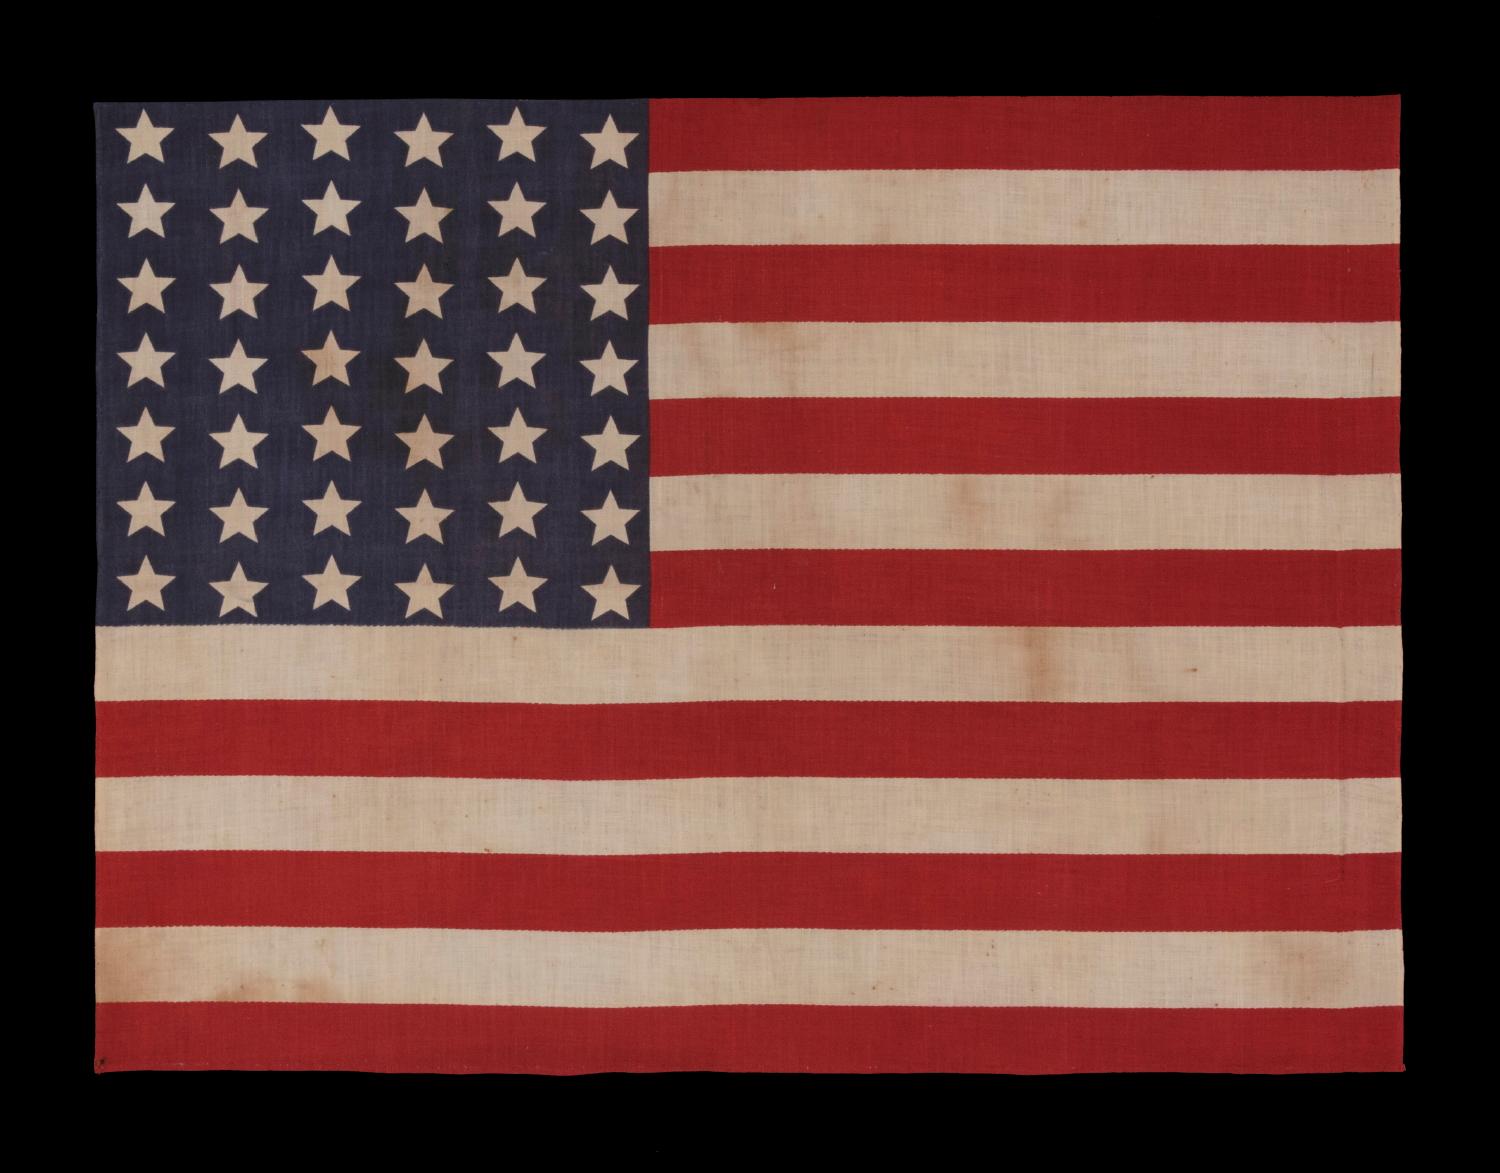 42 STARS IN A WAVE CONFIGURATION OF LINEAL COLUMNS, NEVER AN OFFICIAL STAR COUNT, 1889-1890, WASHINGTON STATEHOOD 

42 star American parade flag, printed on cotton. The stars are arranged in what is called a “wave” configuration. Note how these